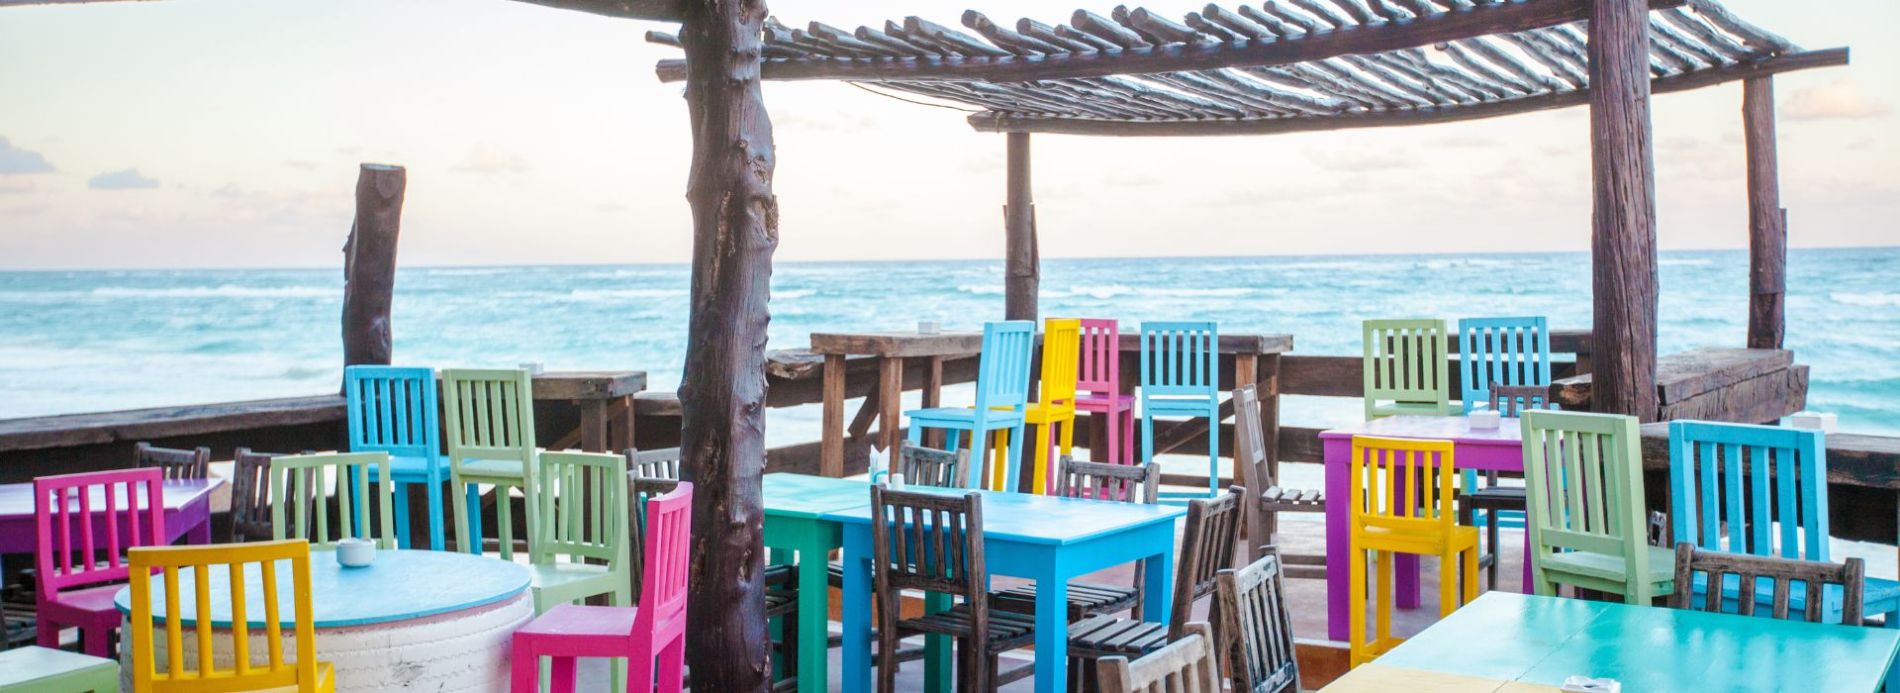 The Ultimate Guide to Panama City Beach Restaurants Feature Image